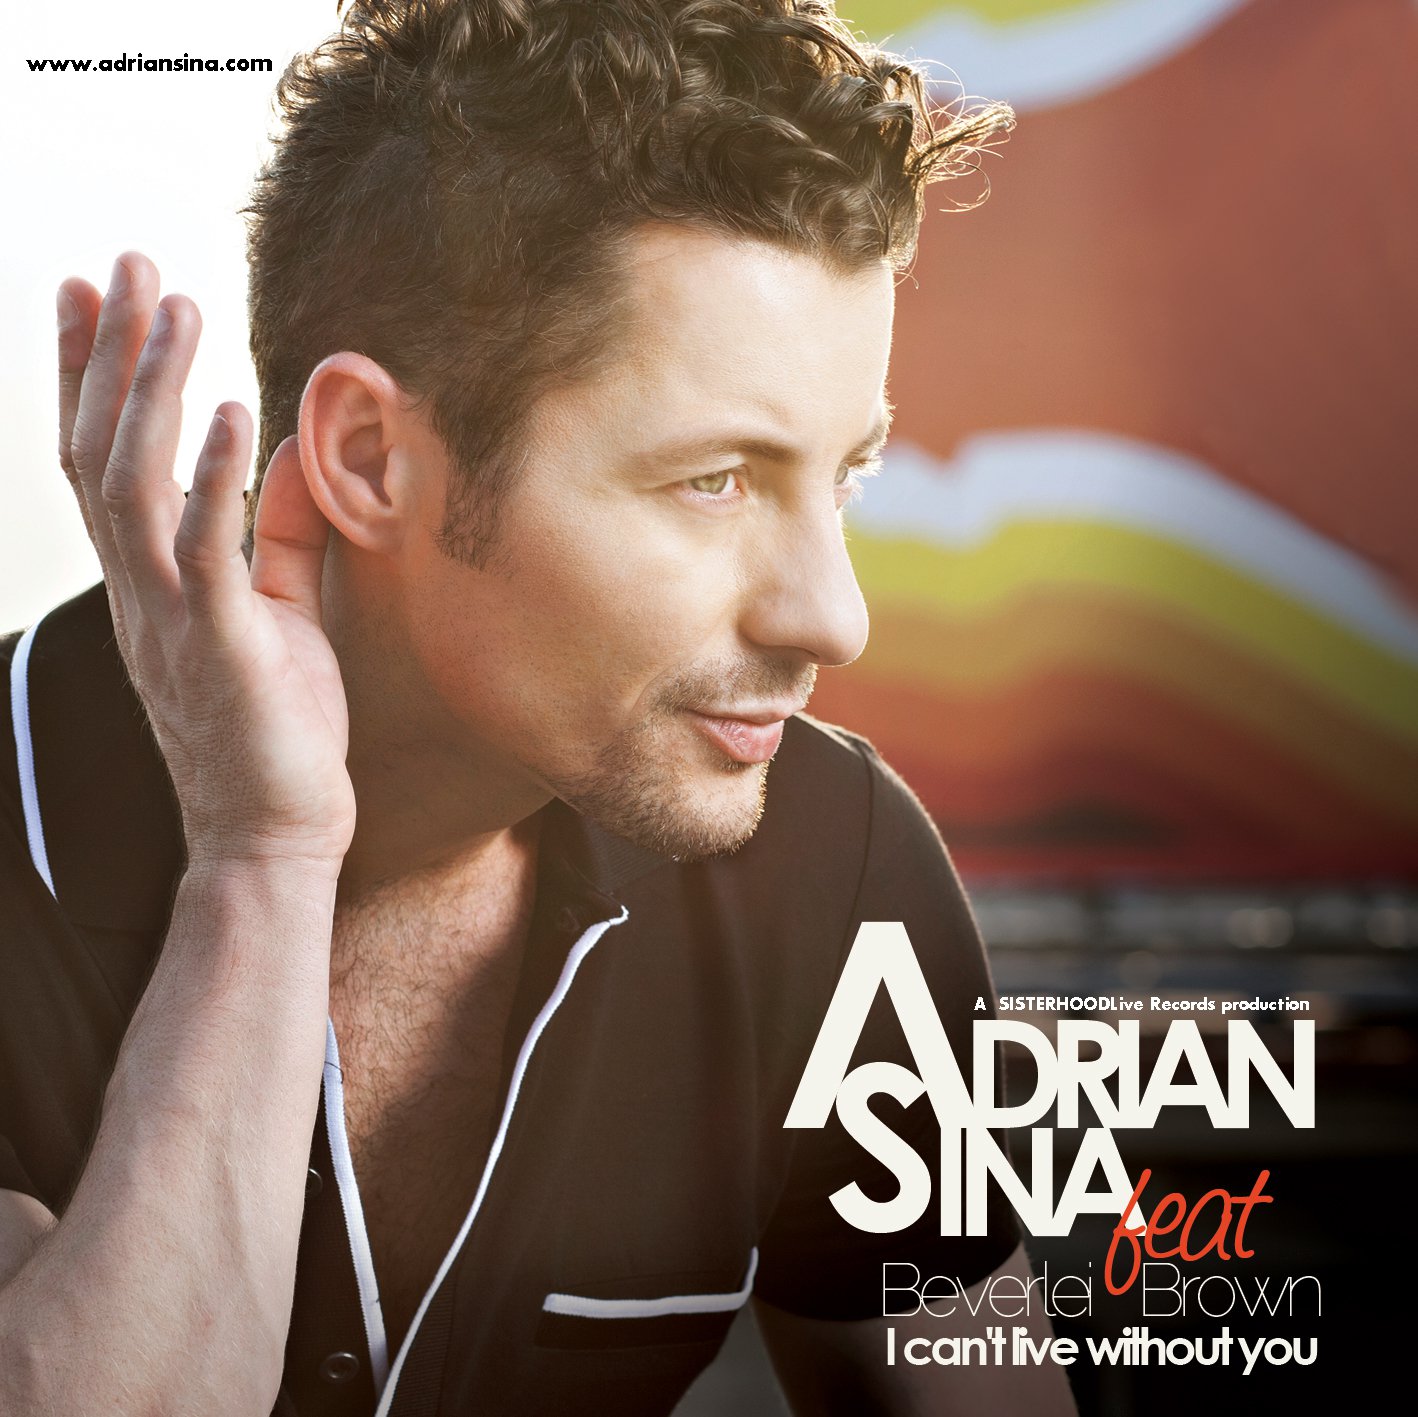 Adrian Sina feat. Beverlei Brown – I Can’t Live Without You (2011)